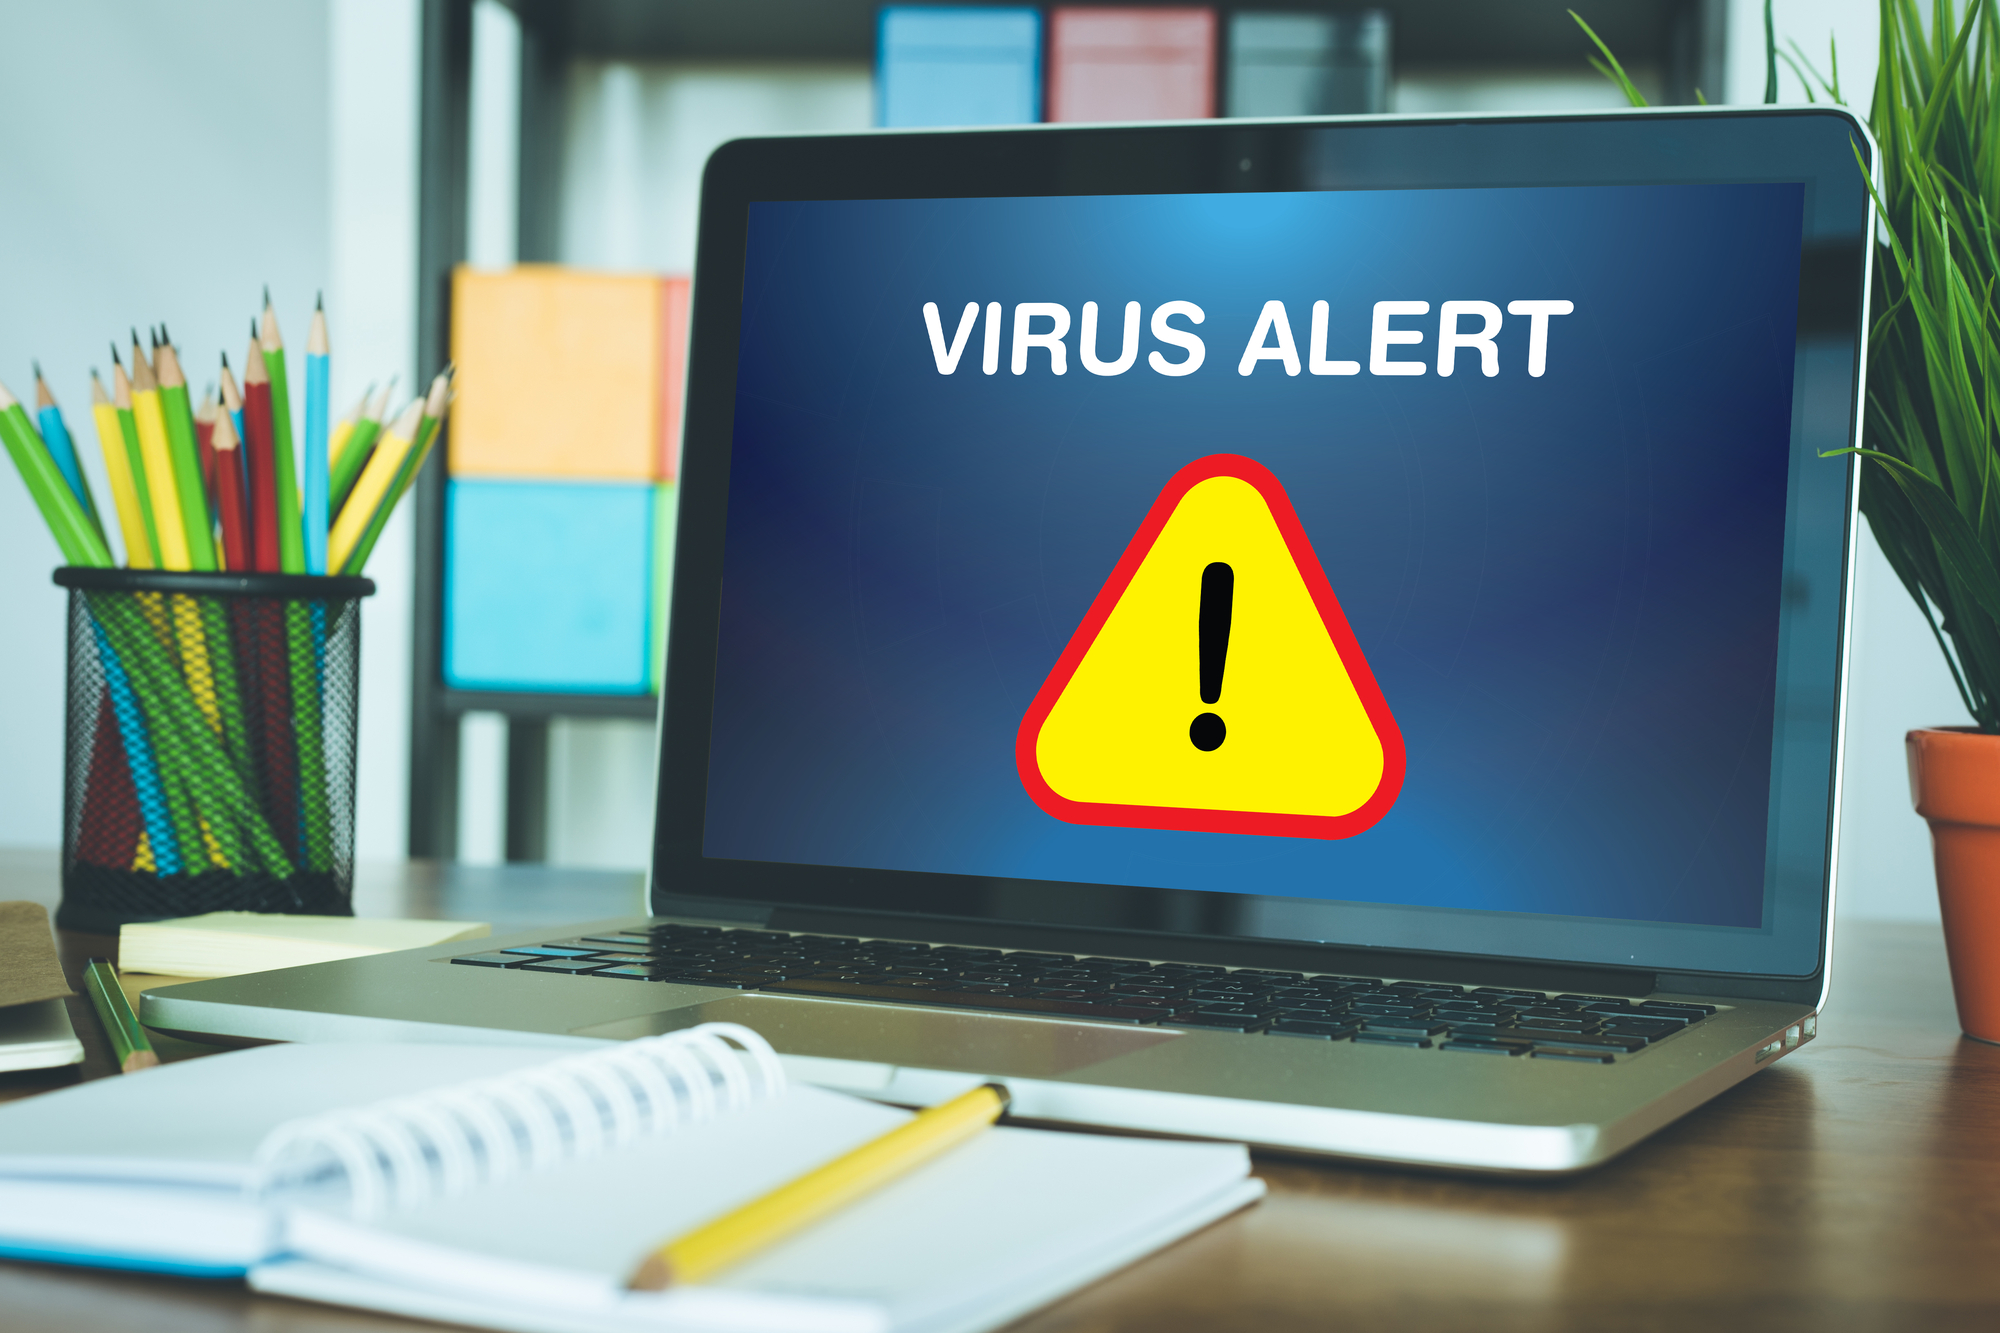 Computer screen showing "Virus Alert" and an excalamtion mark icon